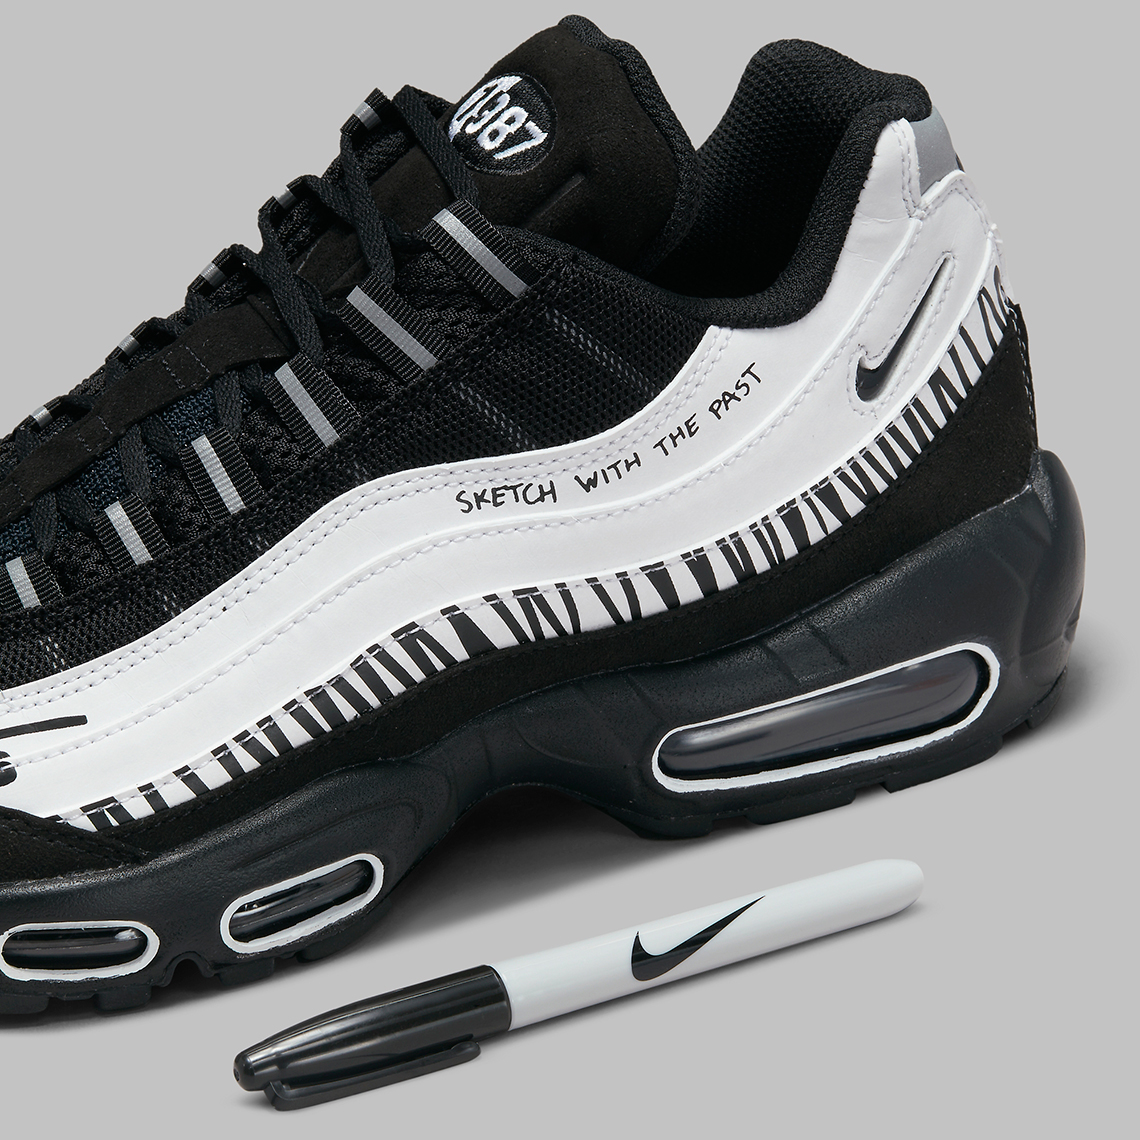 Nike Air Max 95 Sketch With The Past DX4615-100 | SneakerNews.com